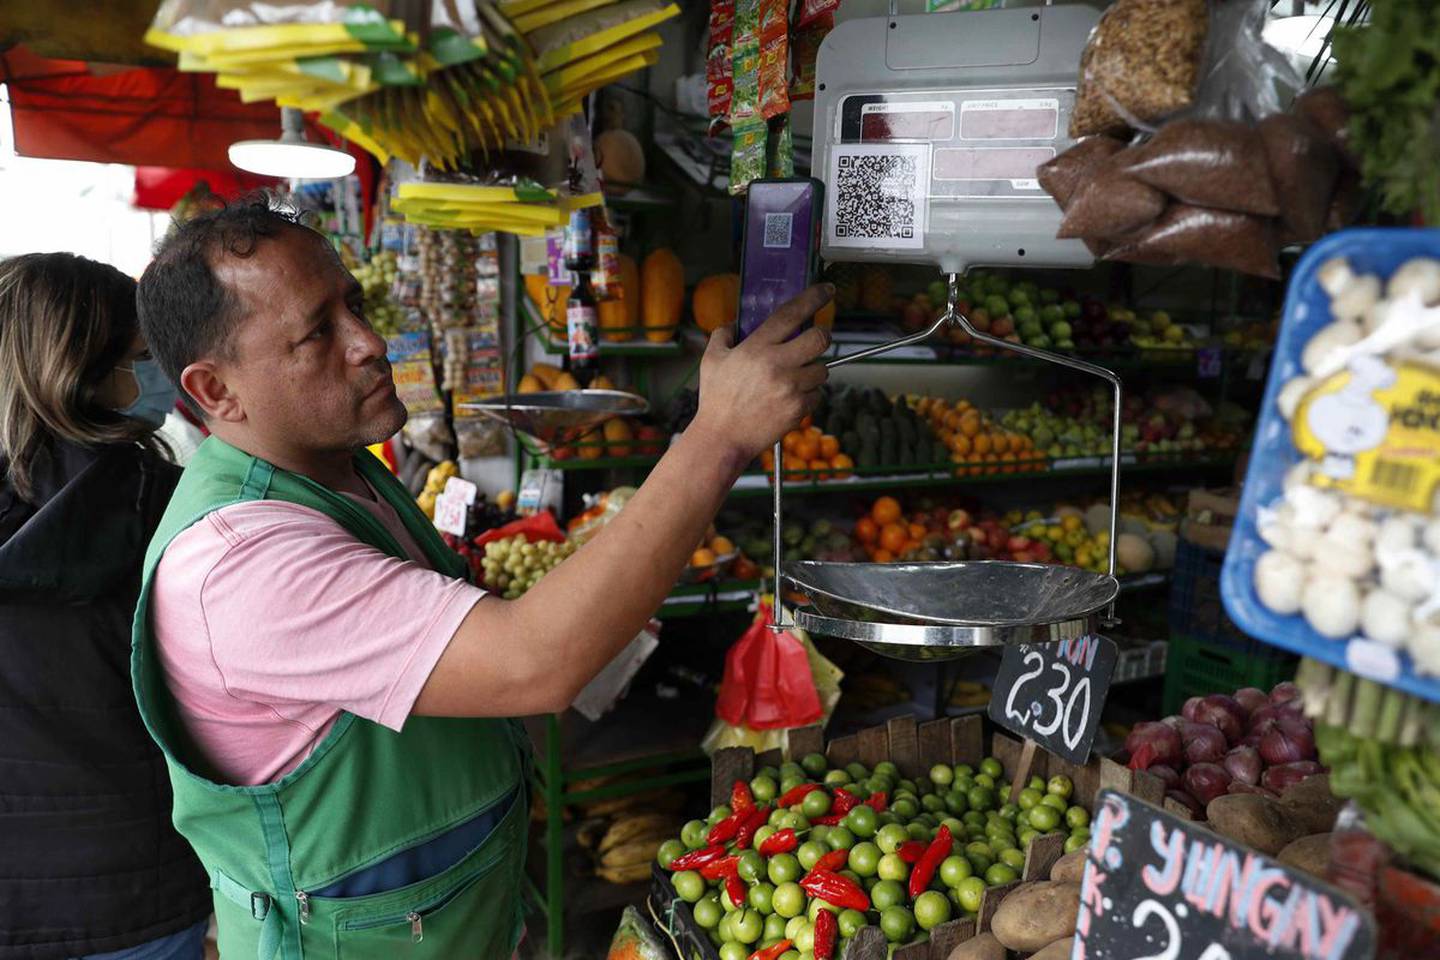 Peru's central bank targets annual consumer price rises of between 1% and 3%.